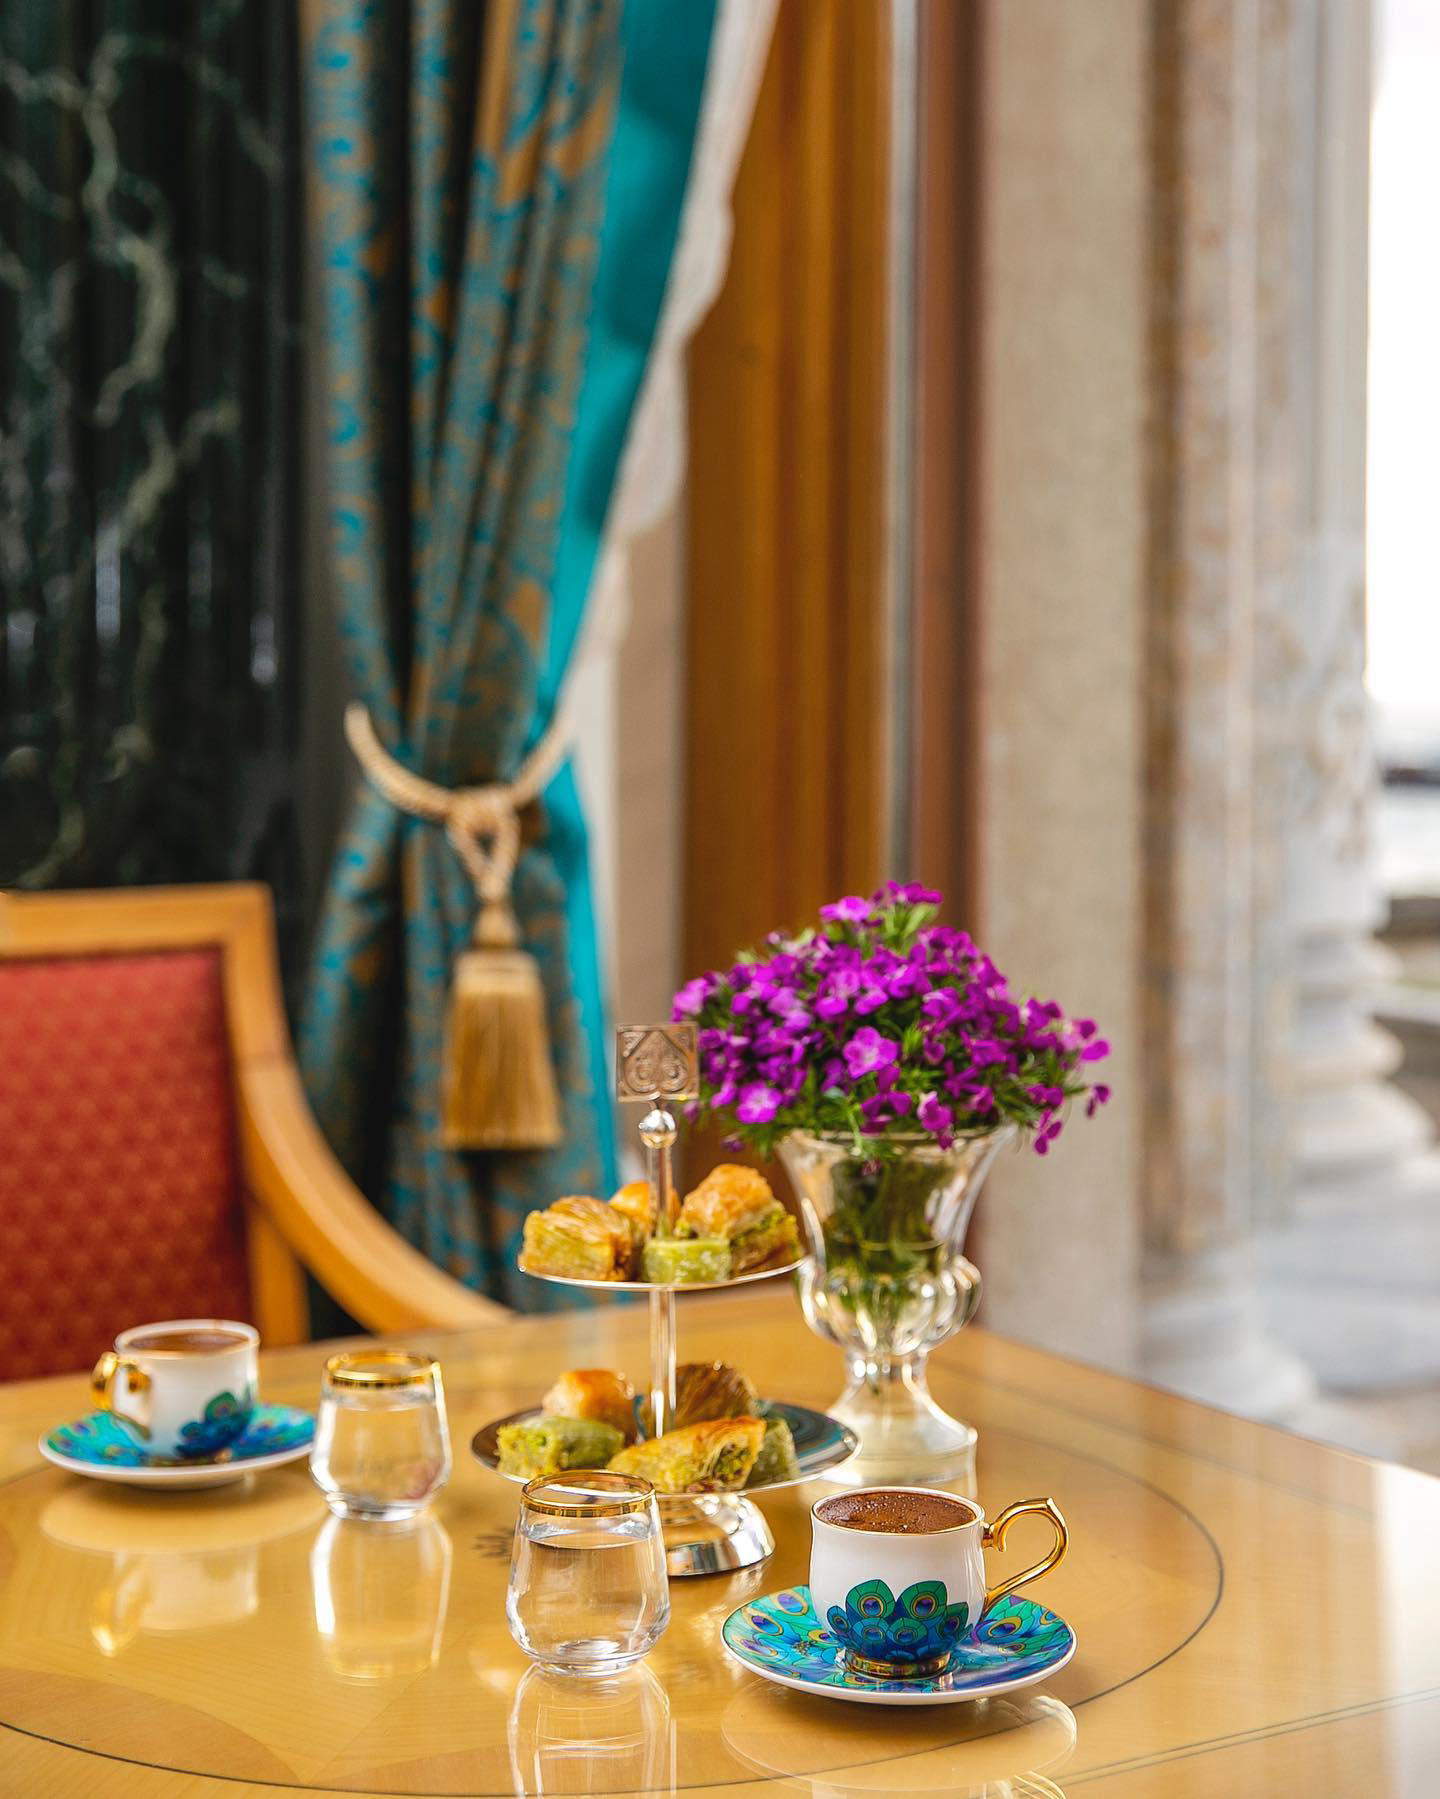 Ciragan Palace Kempinski - A cup of Turkish coffee is remembered for 40 years